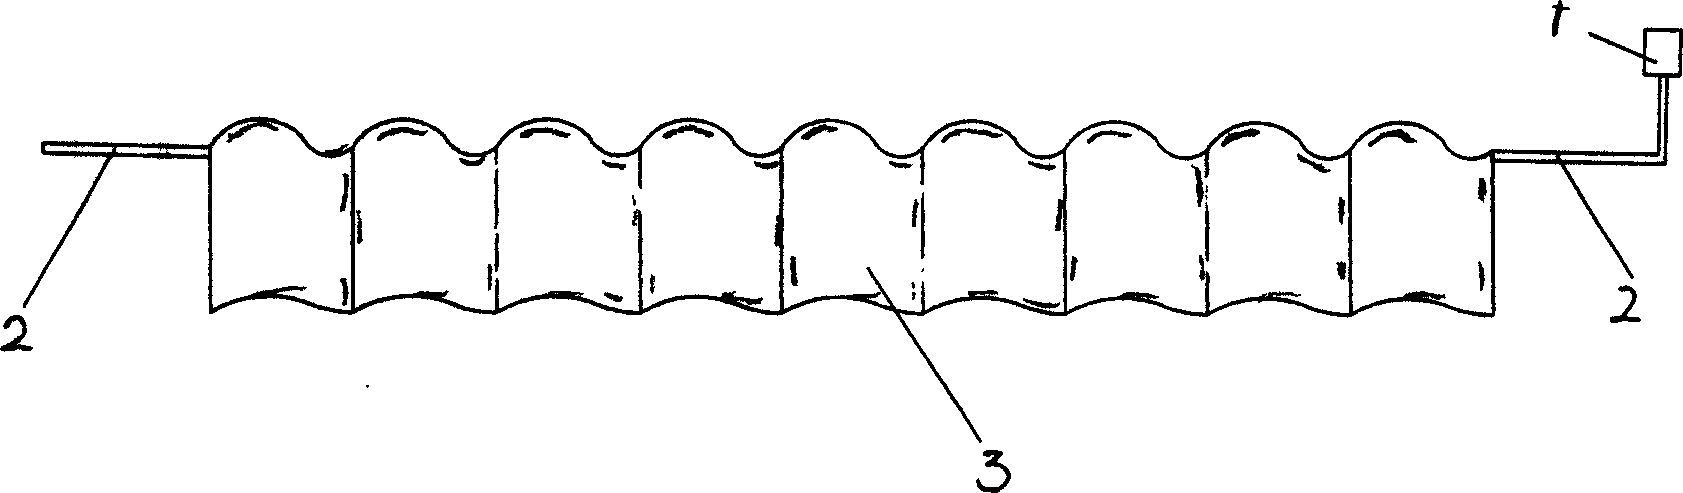 Crosslinked air-ducting structure of indoor unit of air conditioner